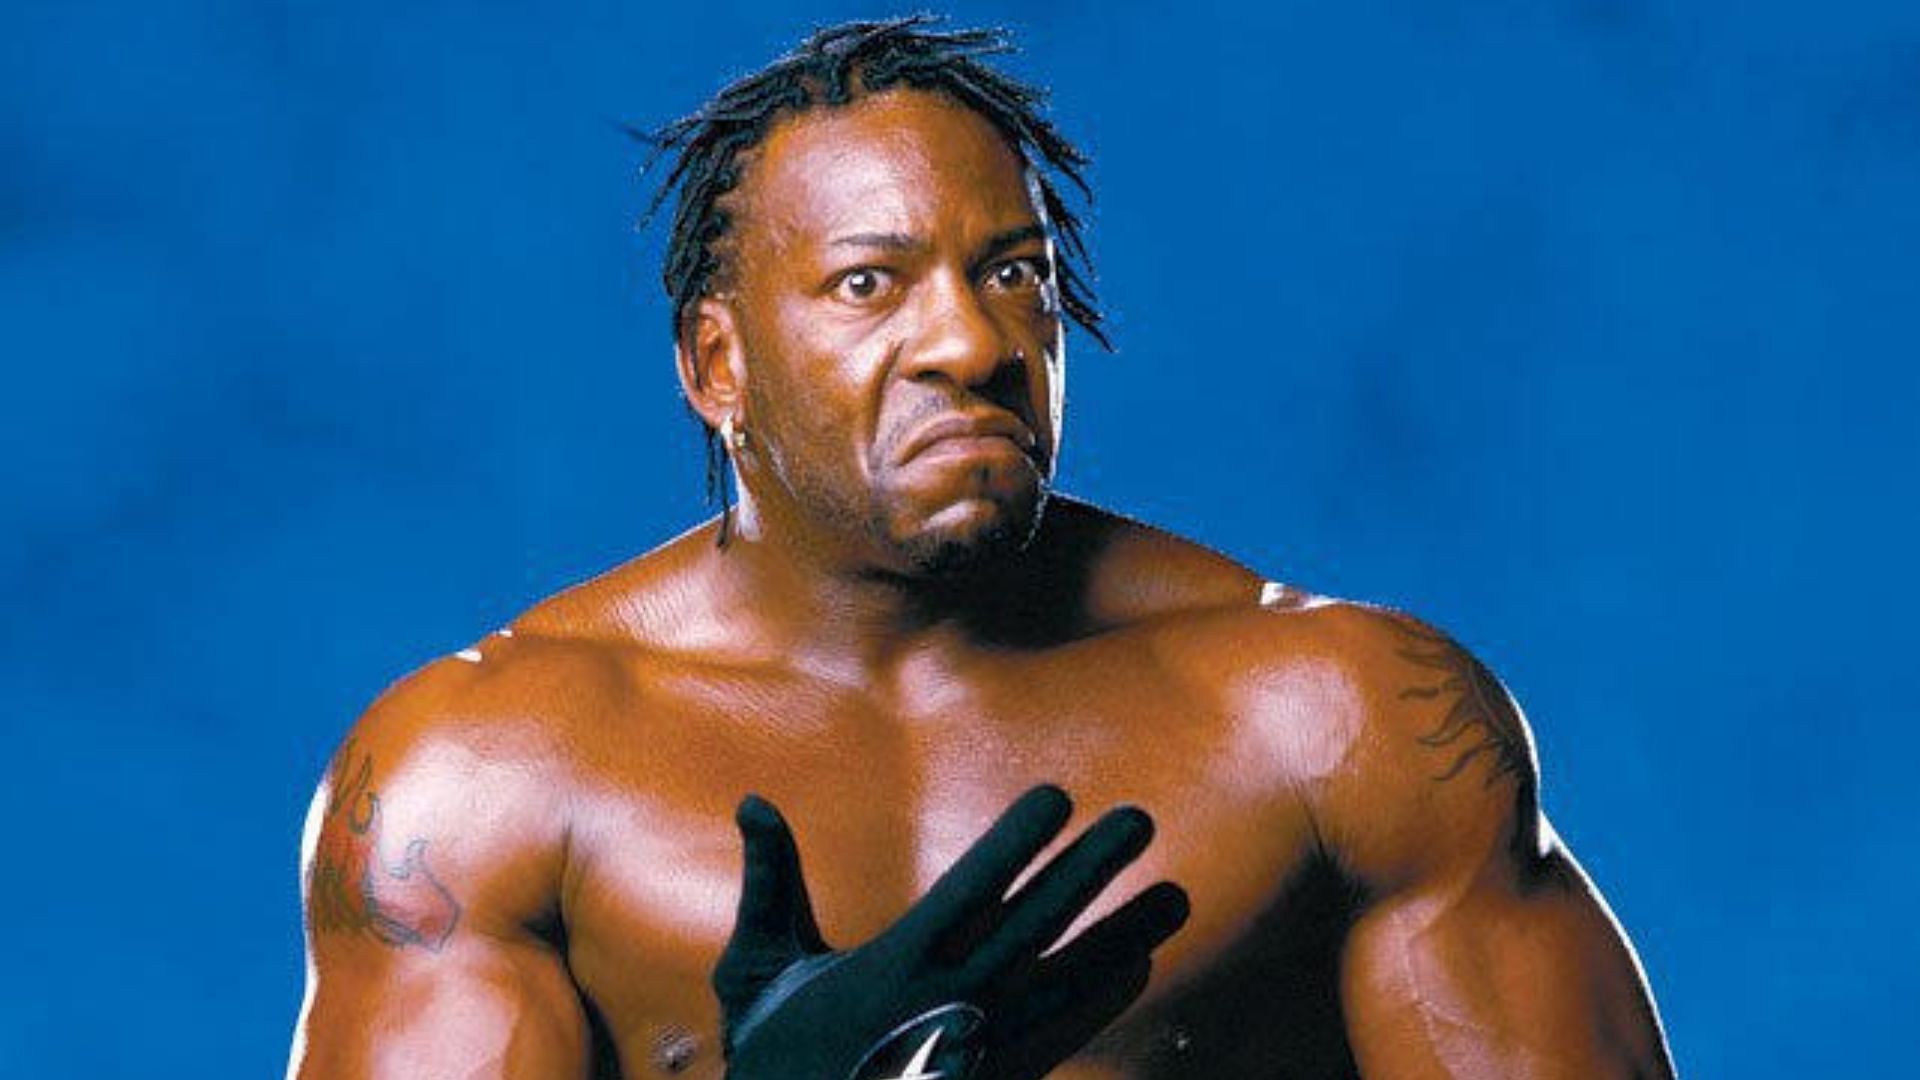 Booker T is a six-time world champion